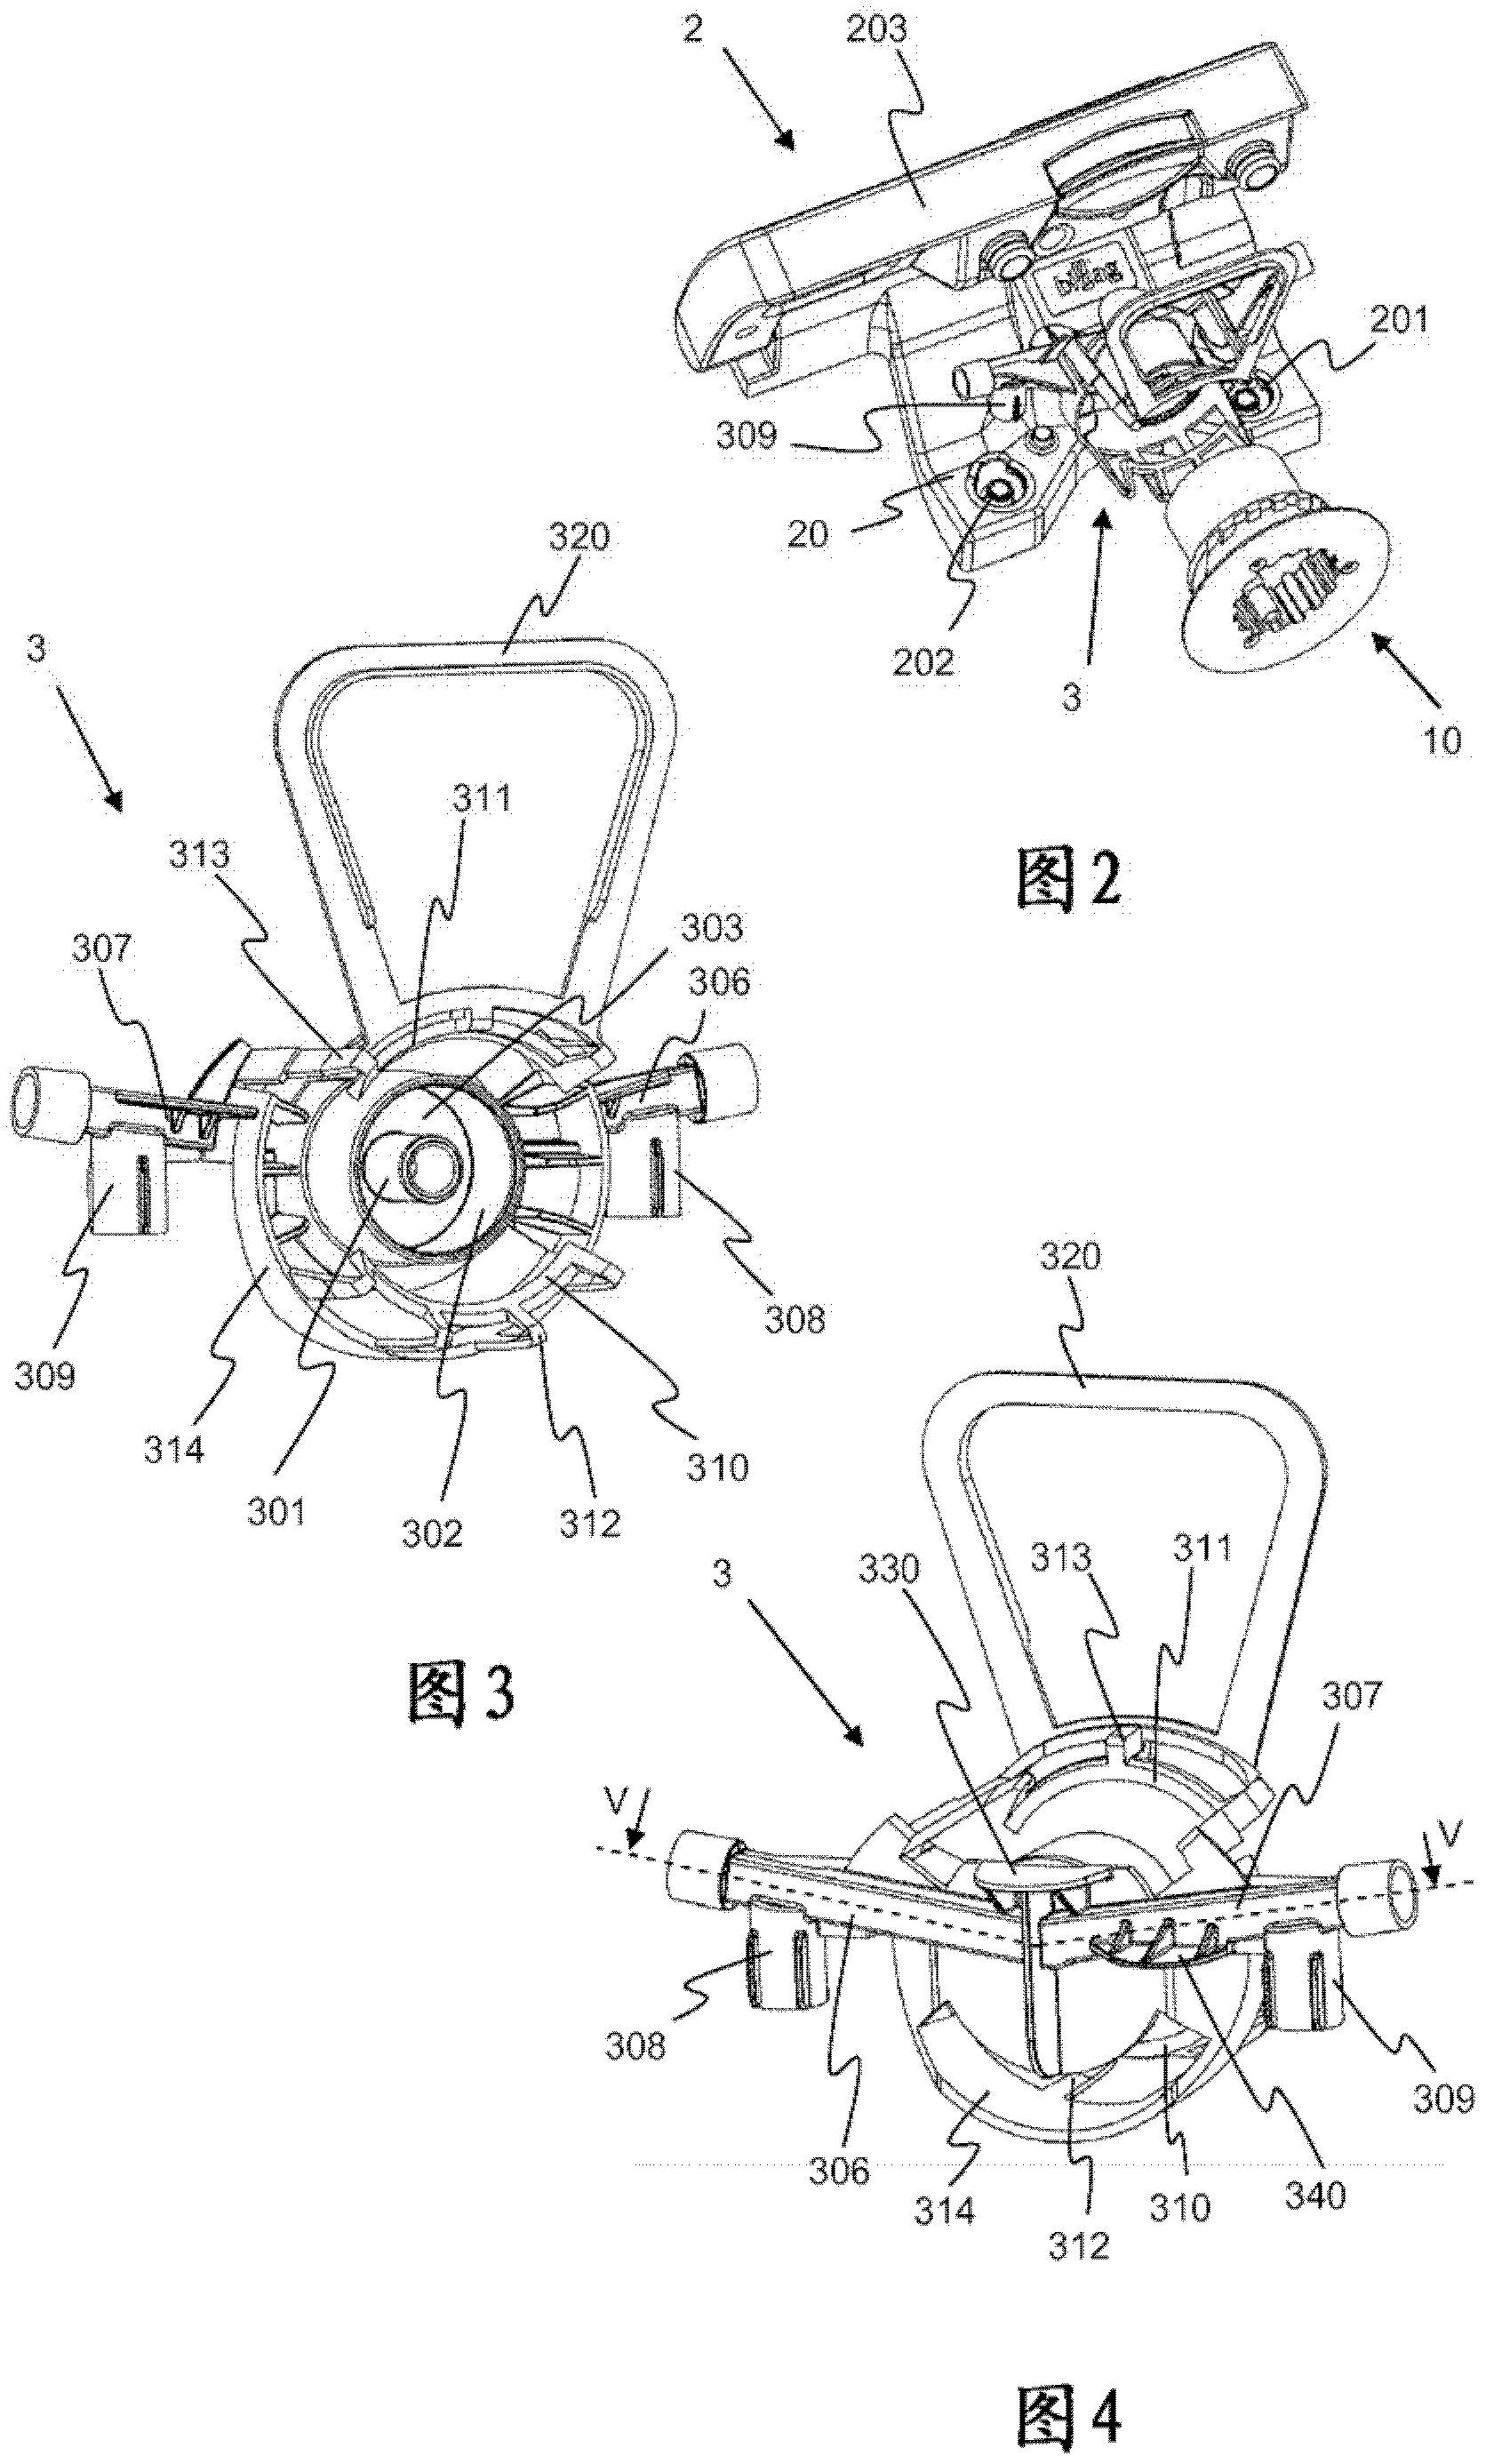 Adapter for connecting a container connector to a connection socket of a dialysis machine